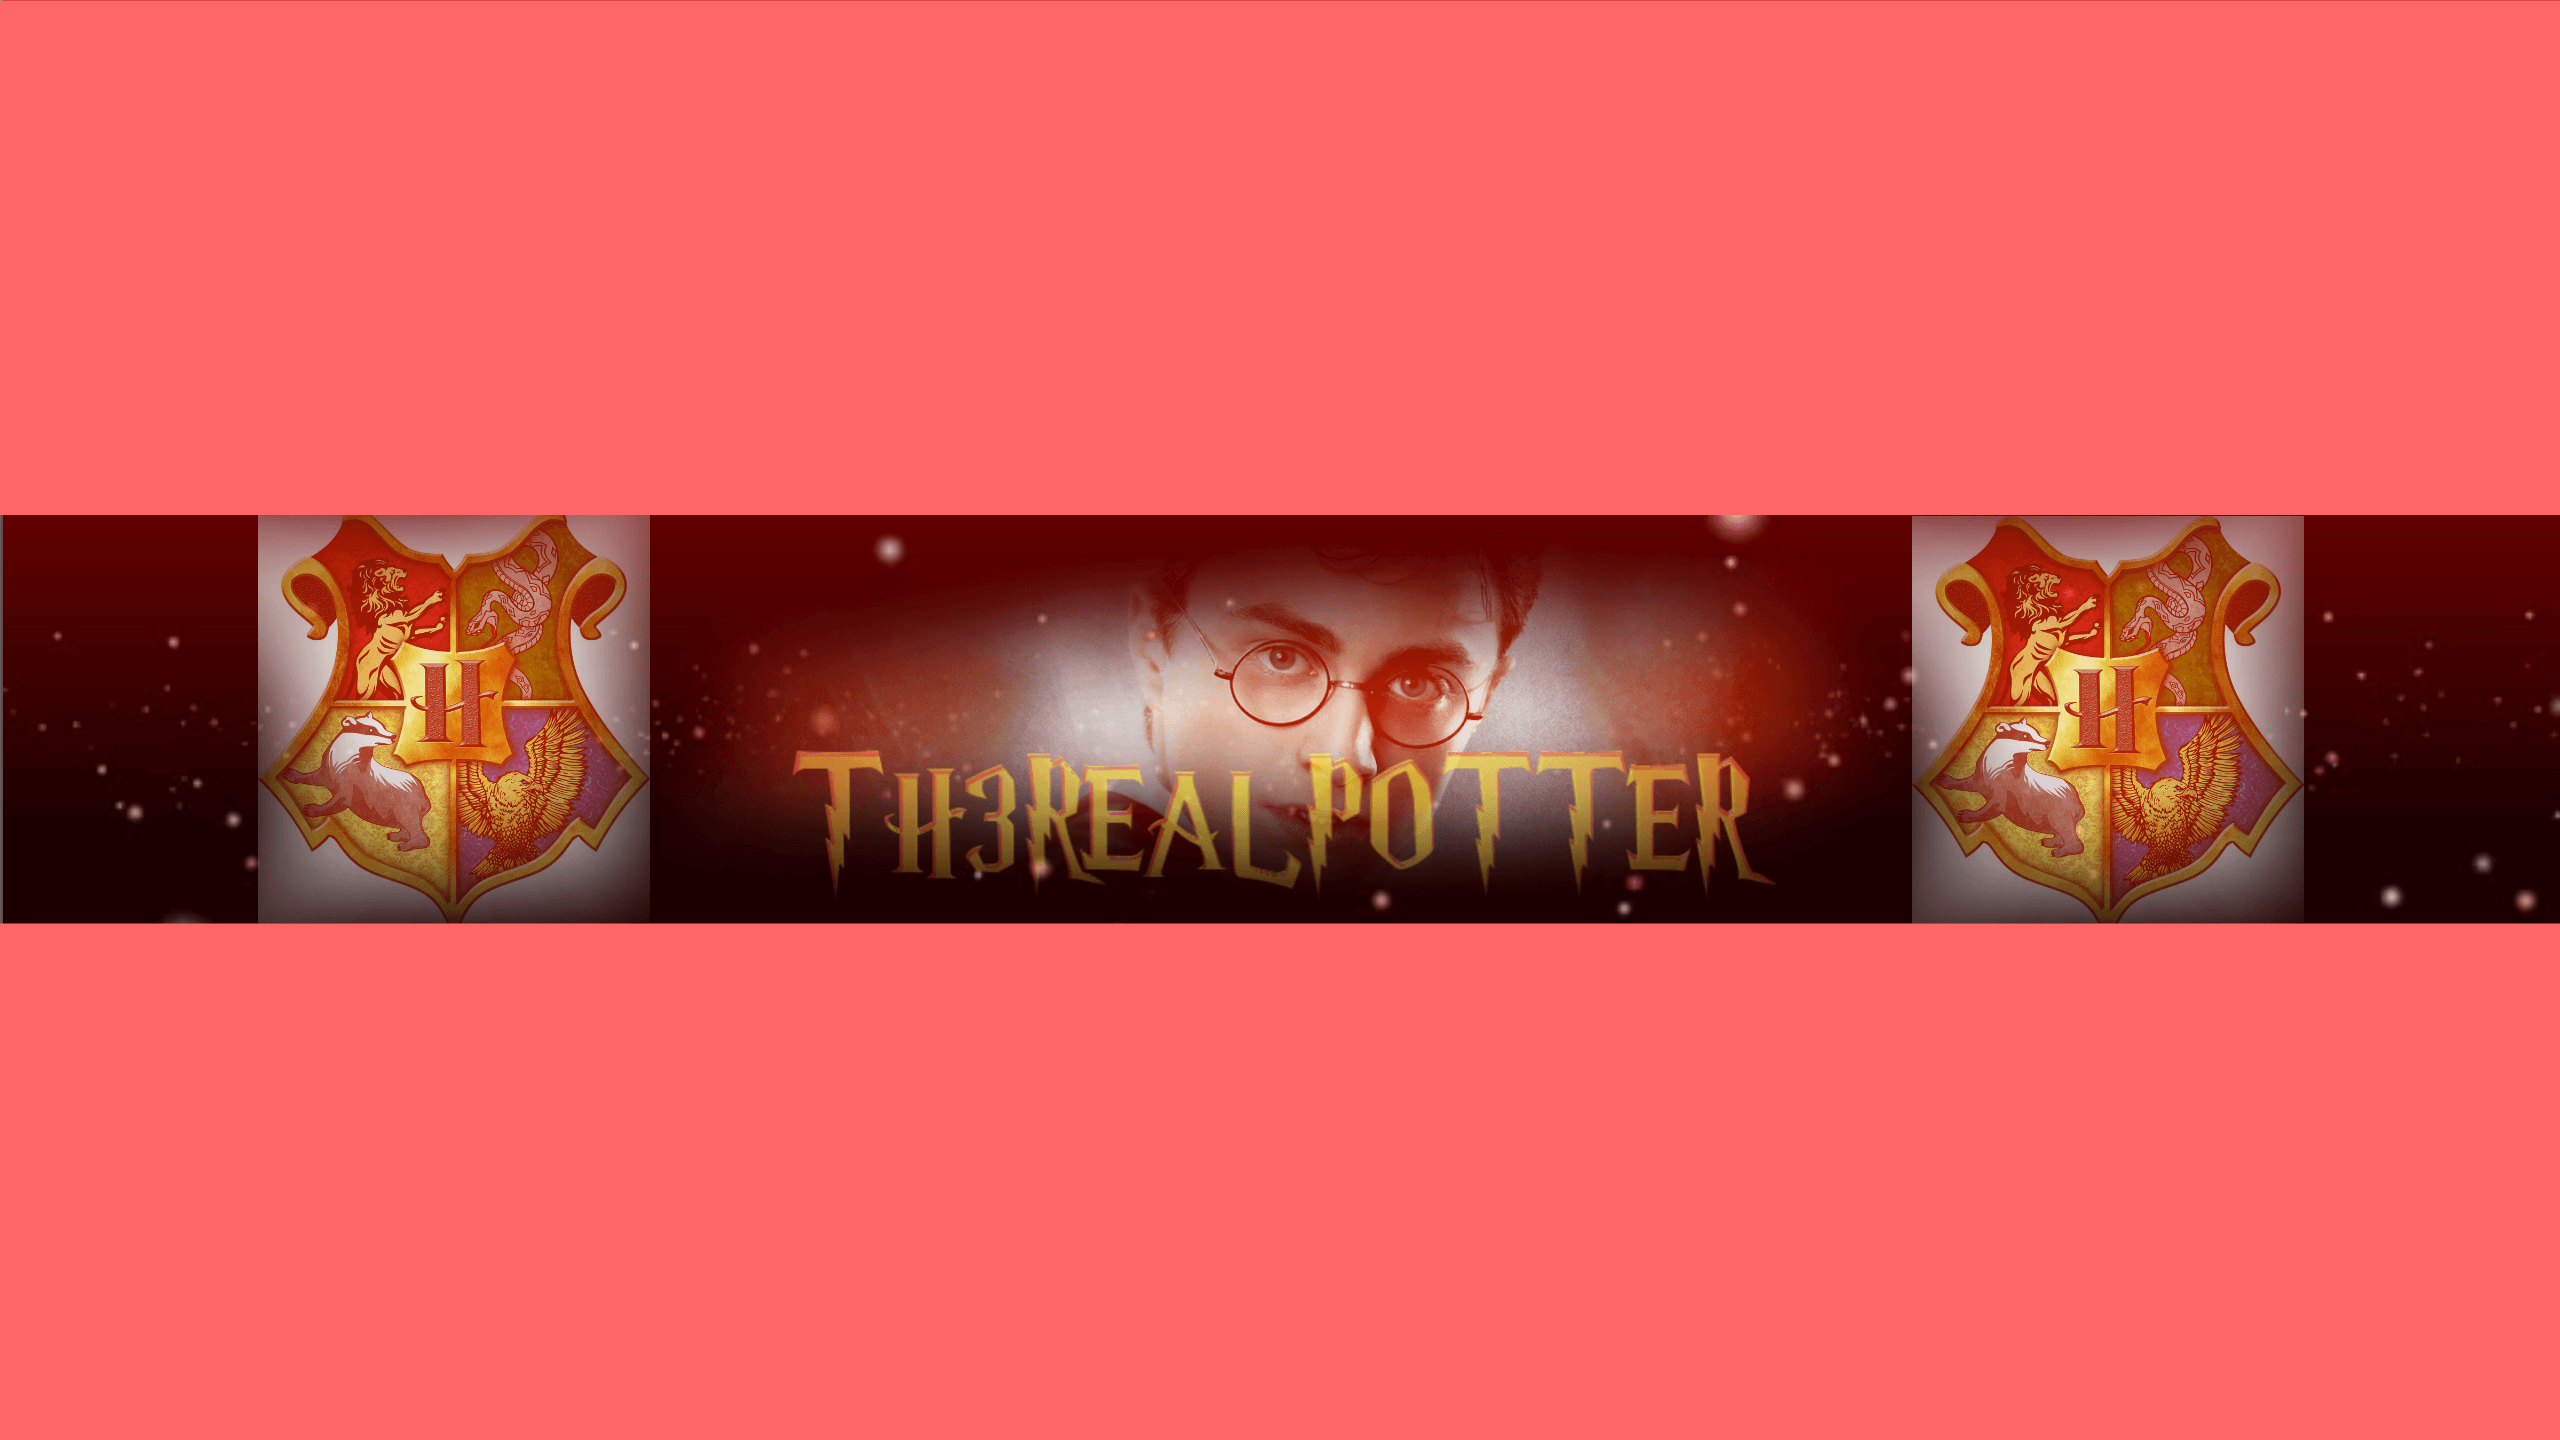 THEREALPOTTER banner